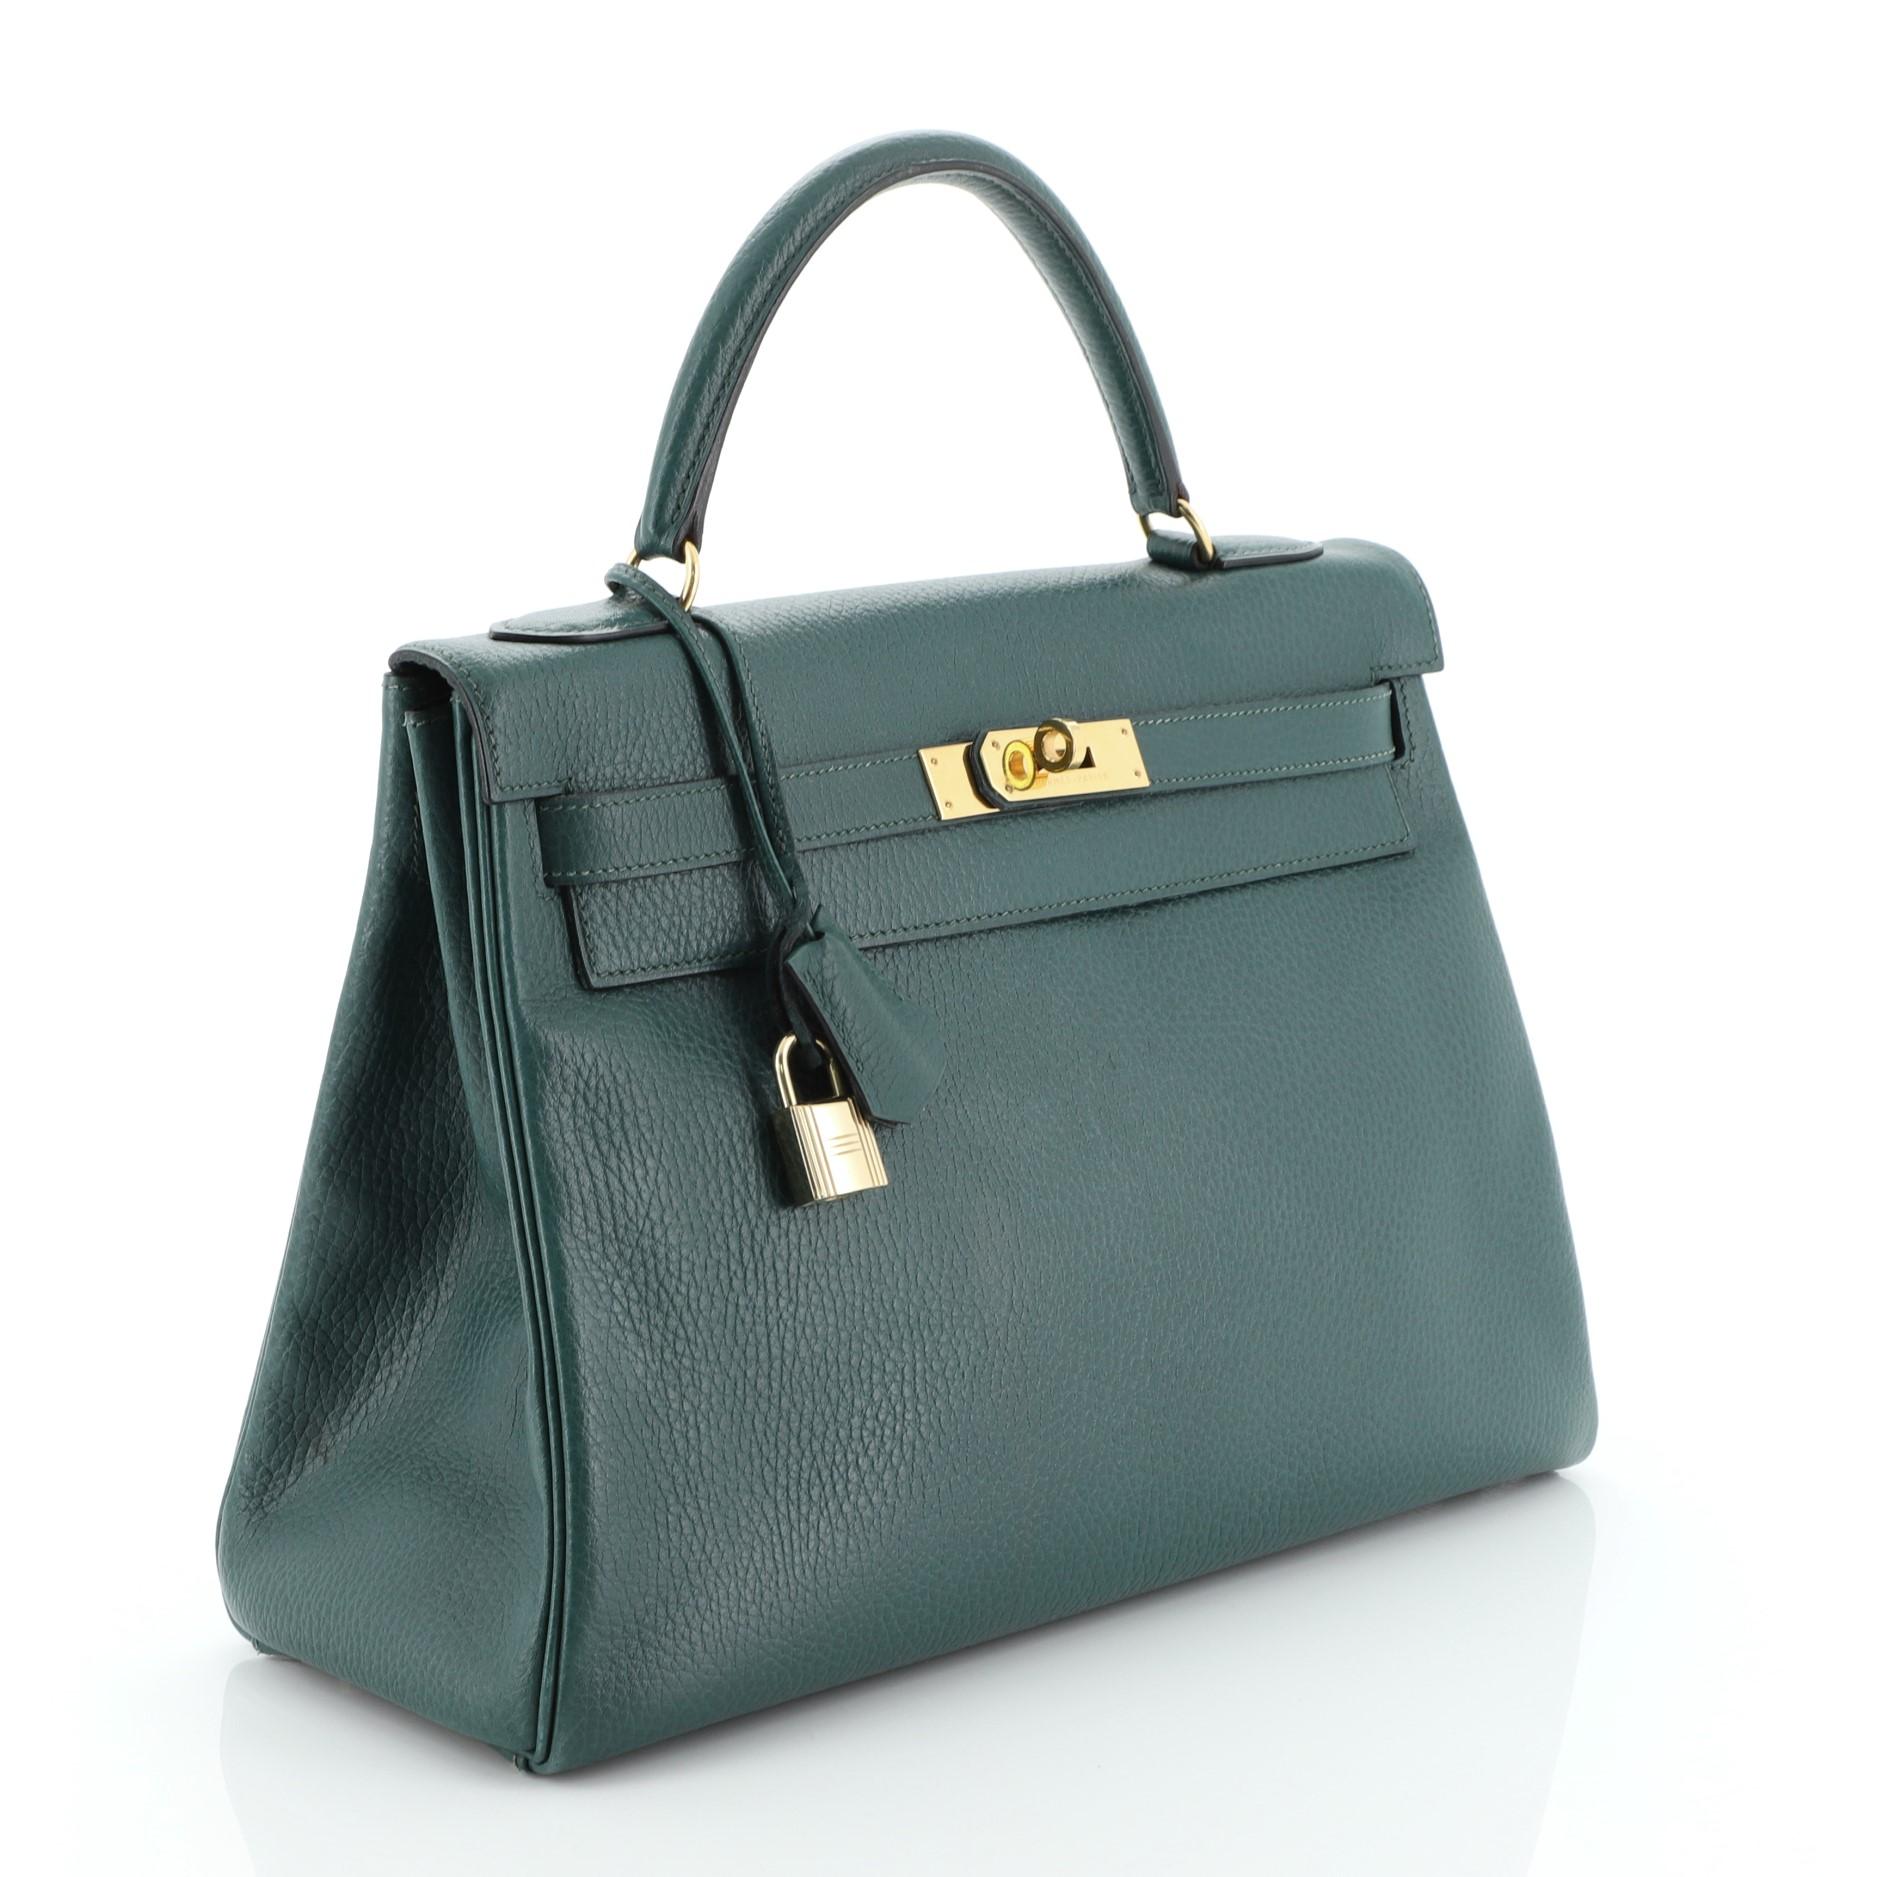 This Hermes Kelly Handbag Vert Clair Ardennes with Gold Hardware 32, crafted in Vert Clair green Ardennes leather, features a single top handle, frontal flap, and gold hardware. Its turn-lock closure opens to a Vert Fonce green Chevre leather